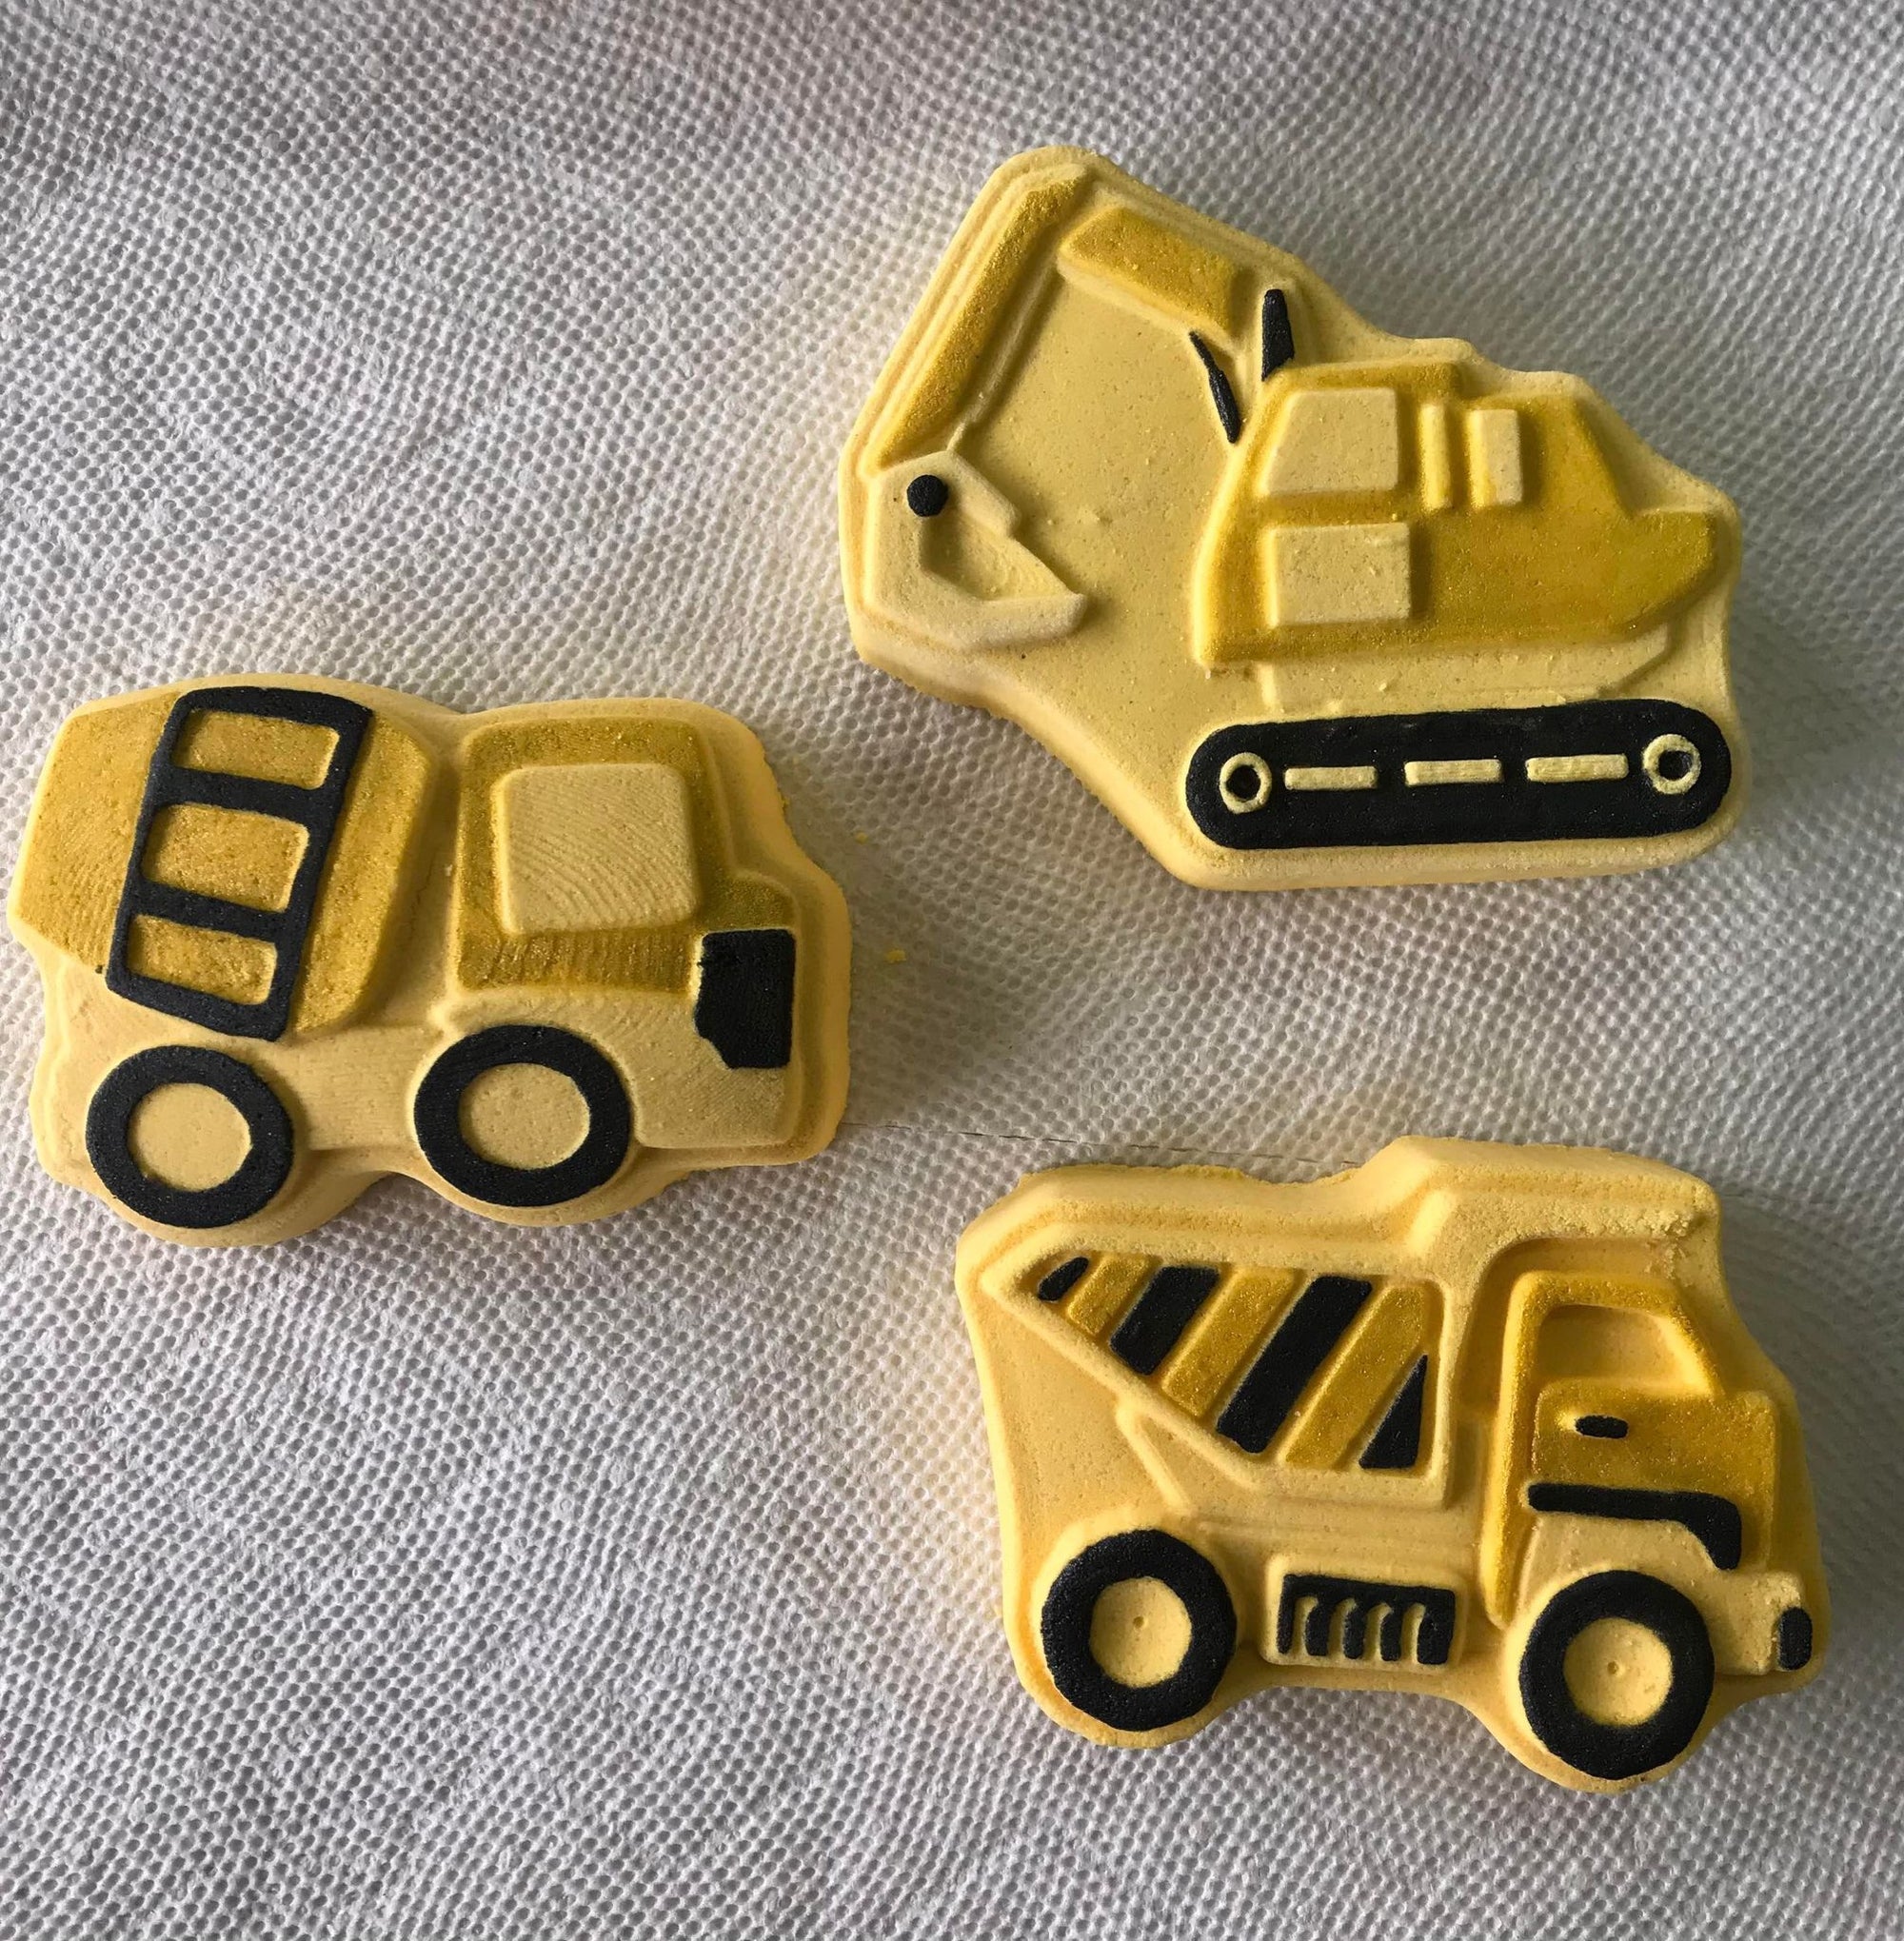 Construction vehicle bath bombs for kids